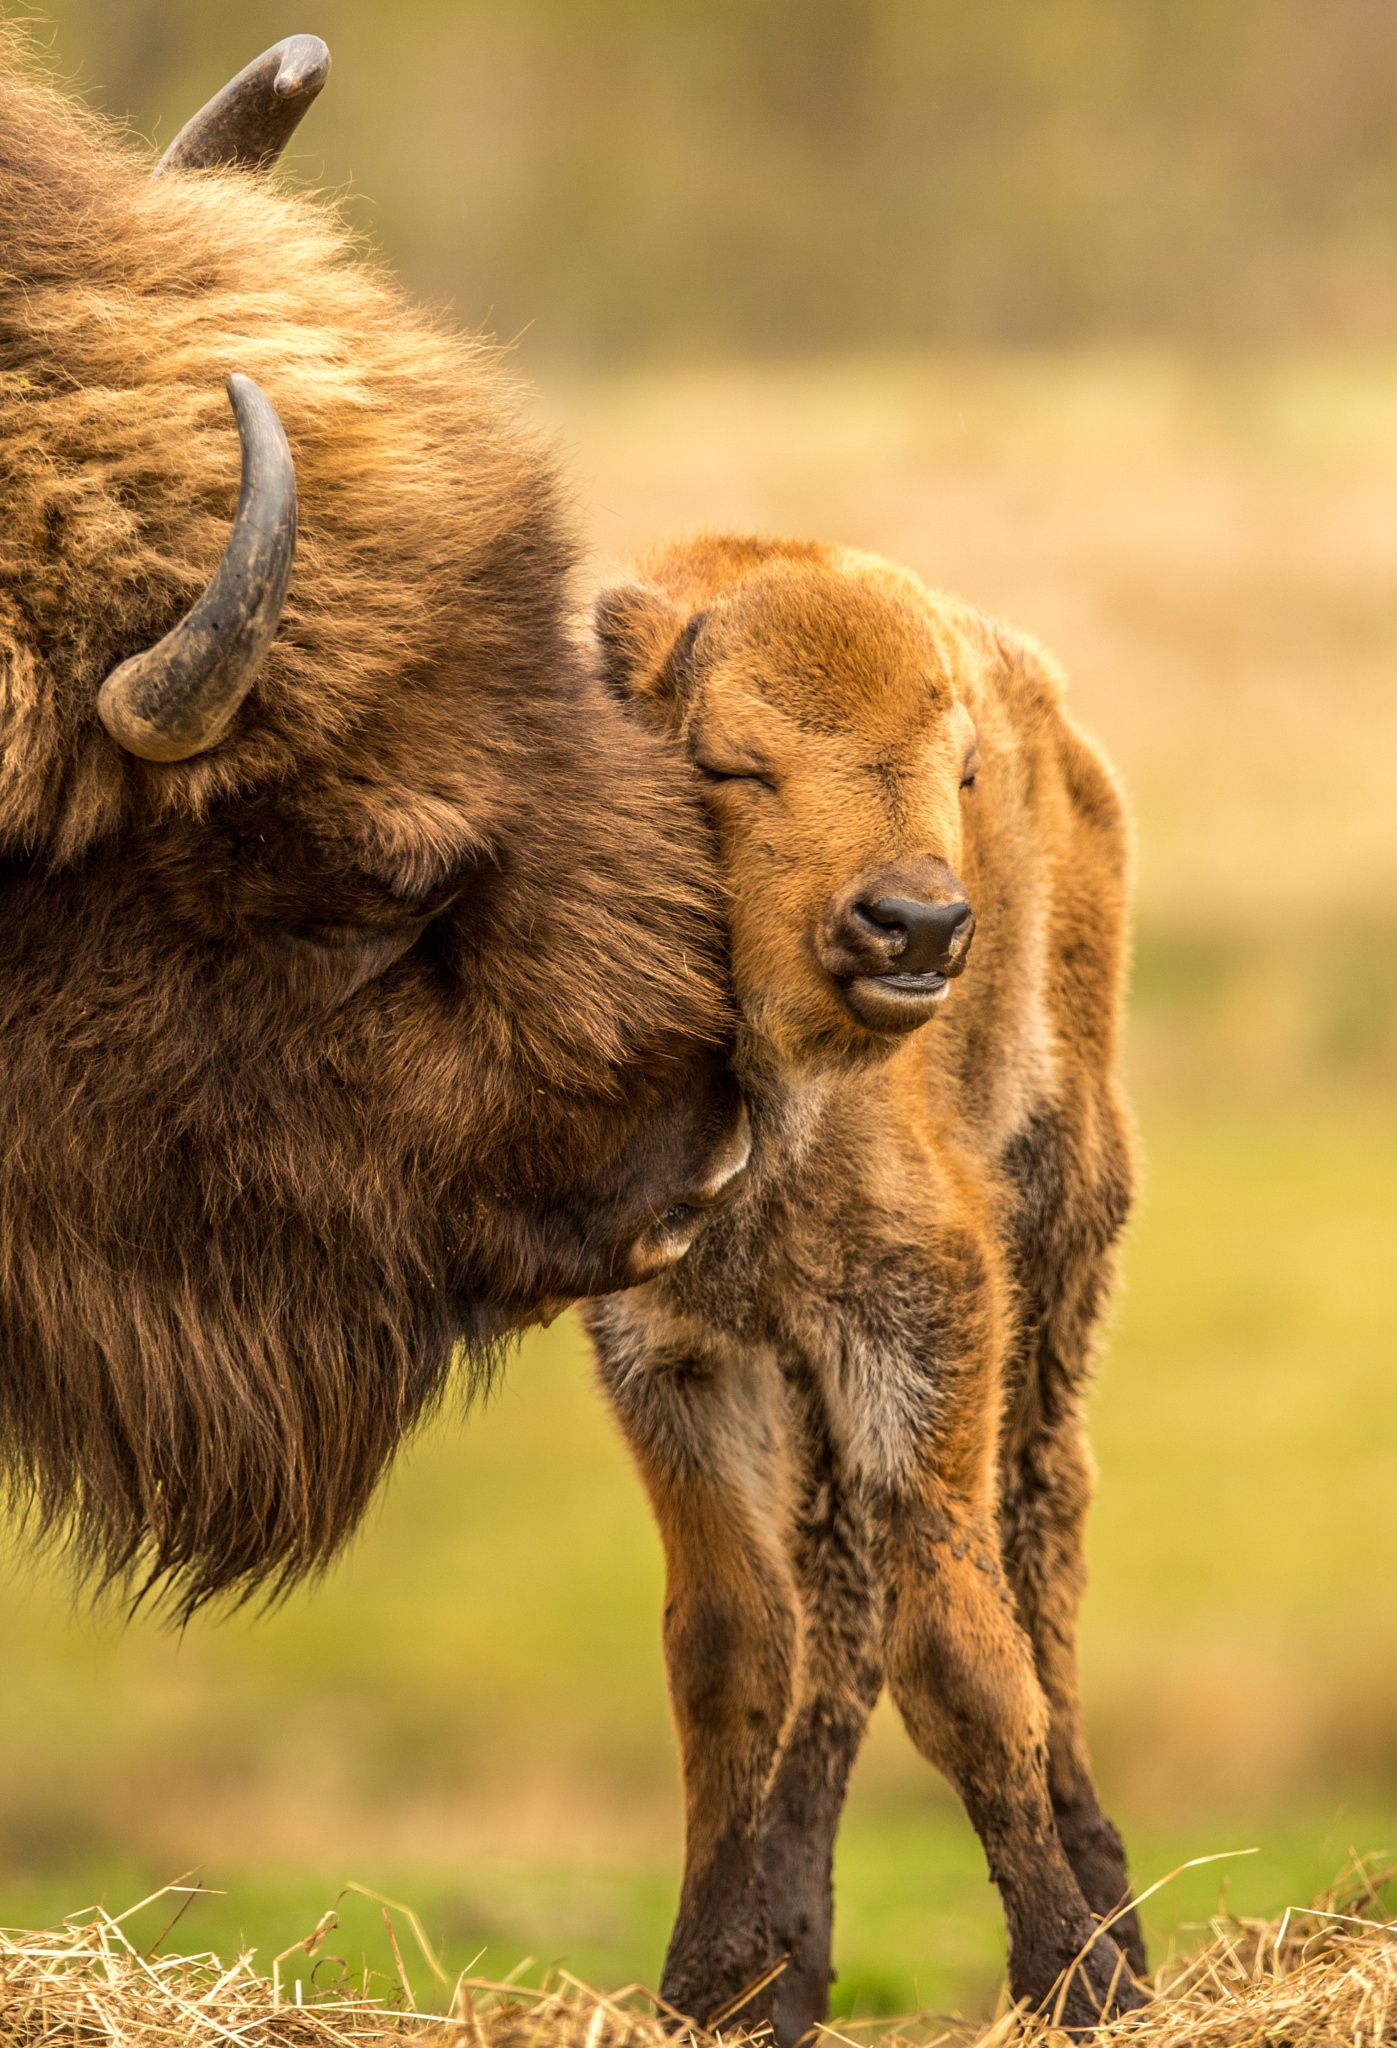 Bison calf groomed :) | by Matthias Boeke on 500px | Pets & Animals ...